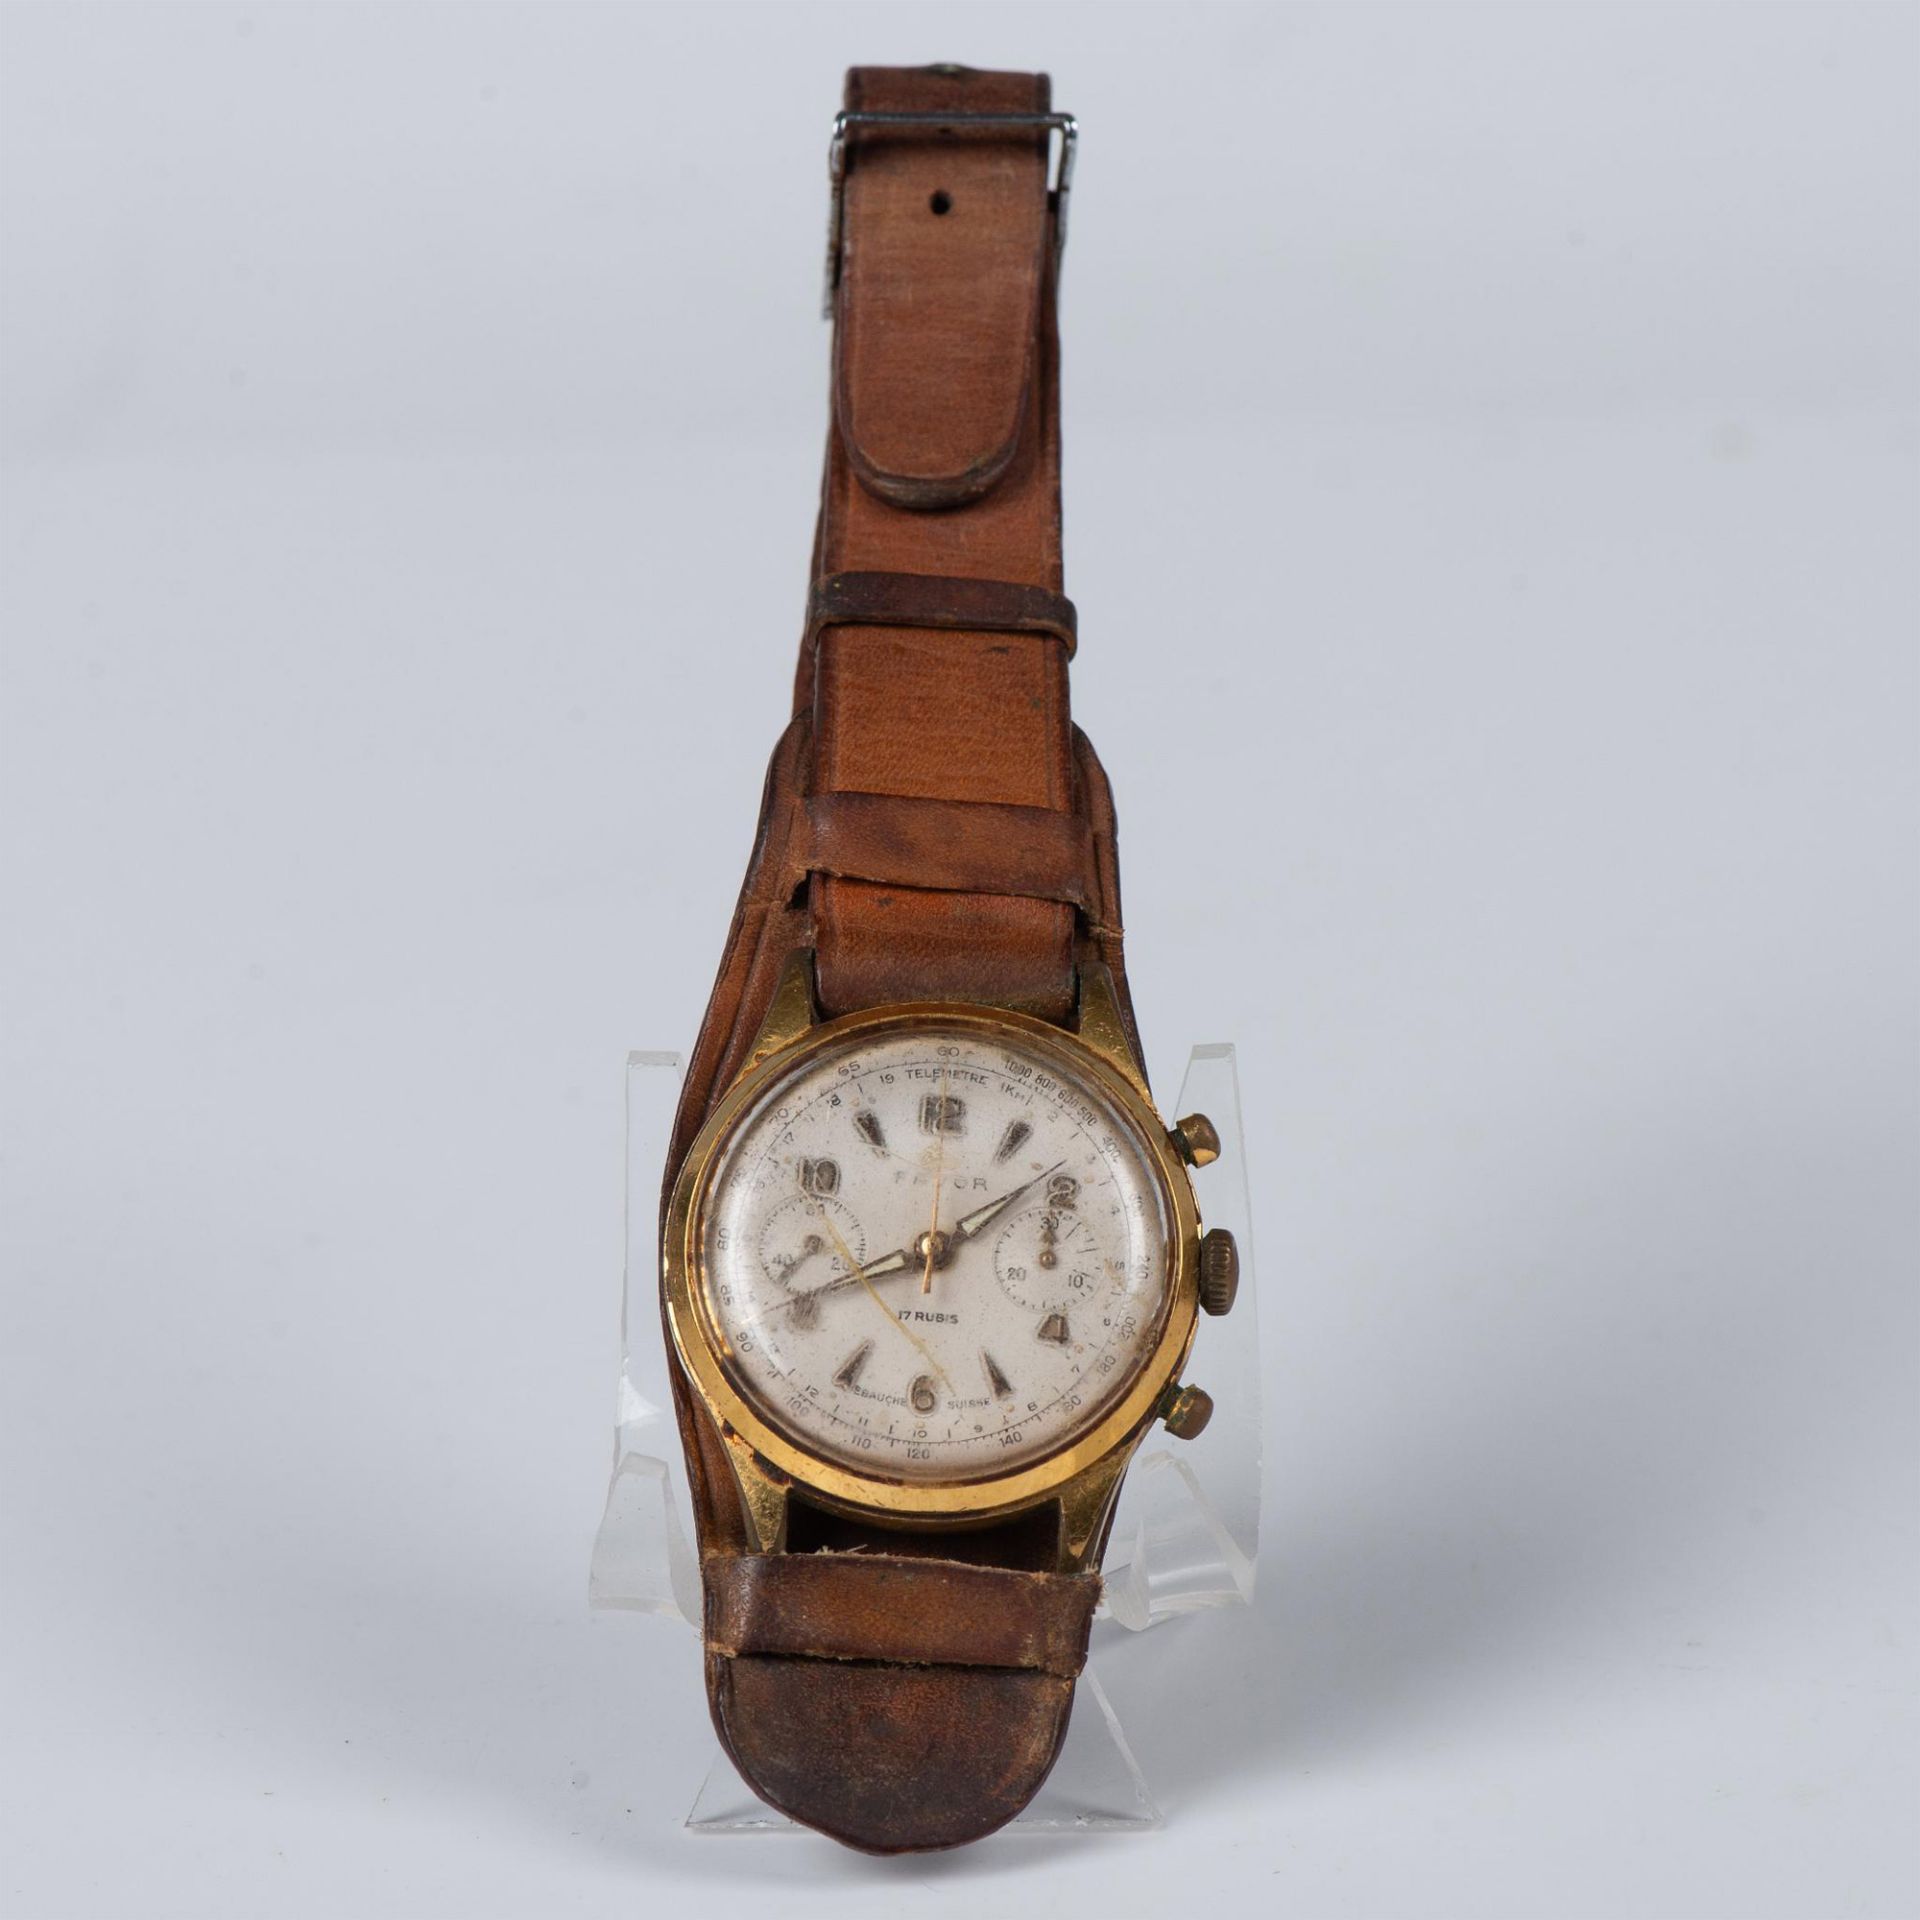 Gents 1950s/60s Favor Chronograph Wrist Watch - Image 2 of 7